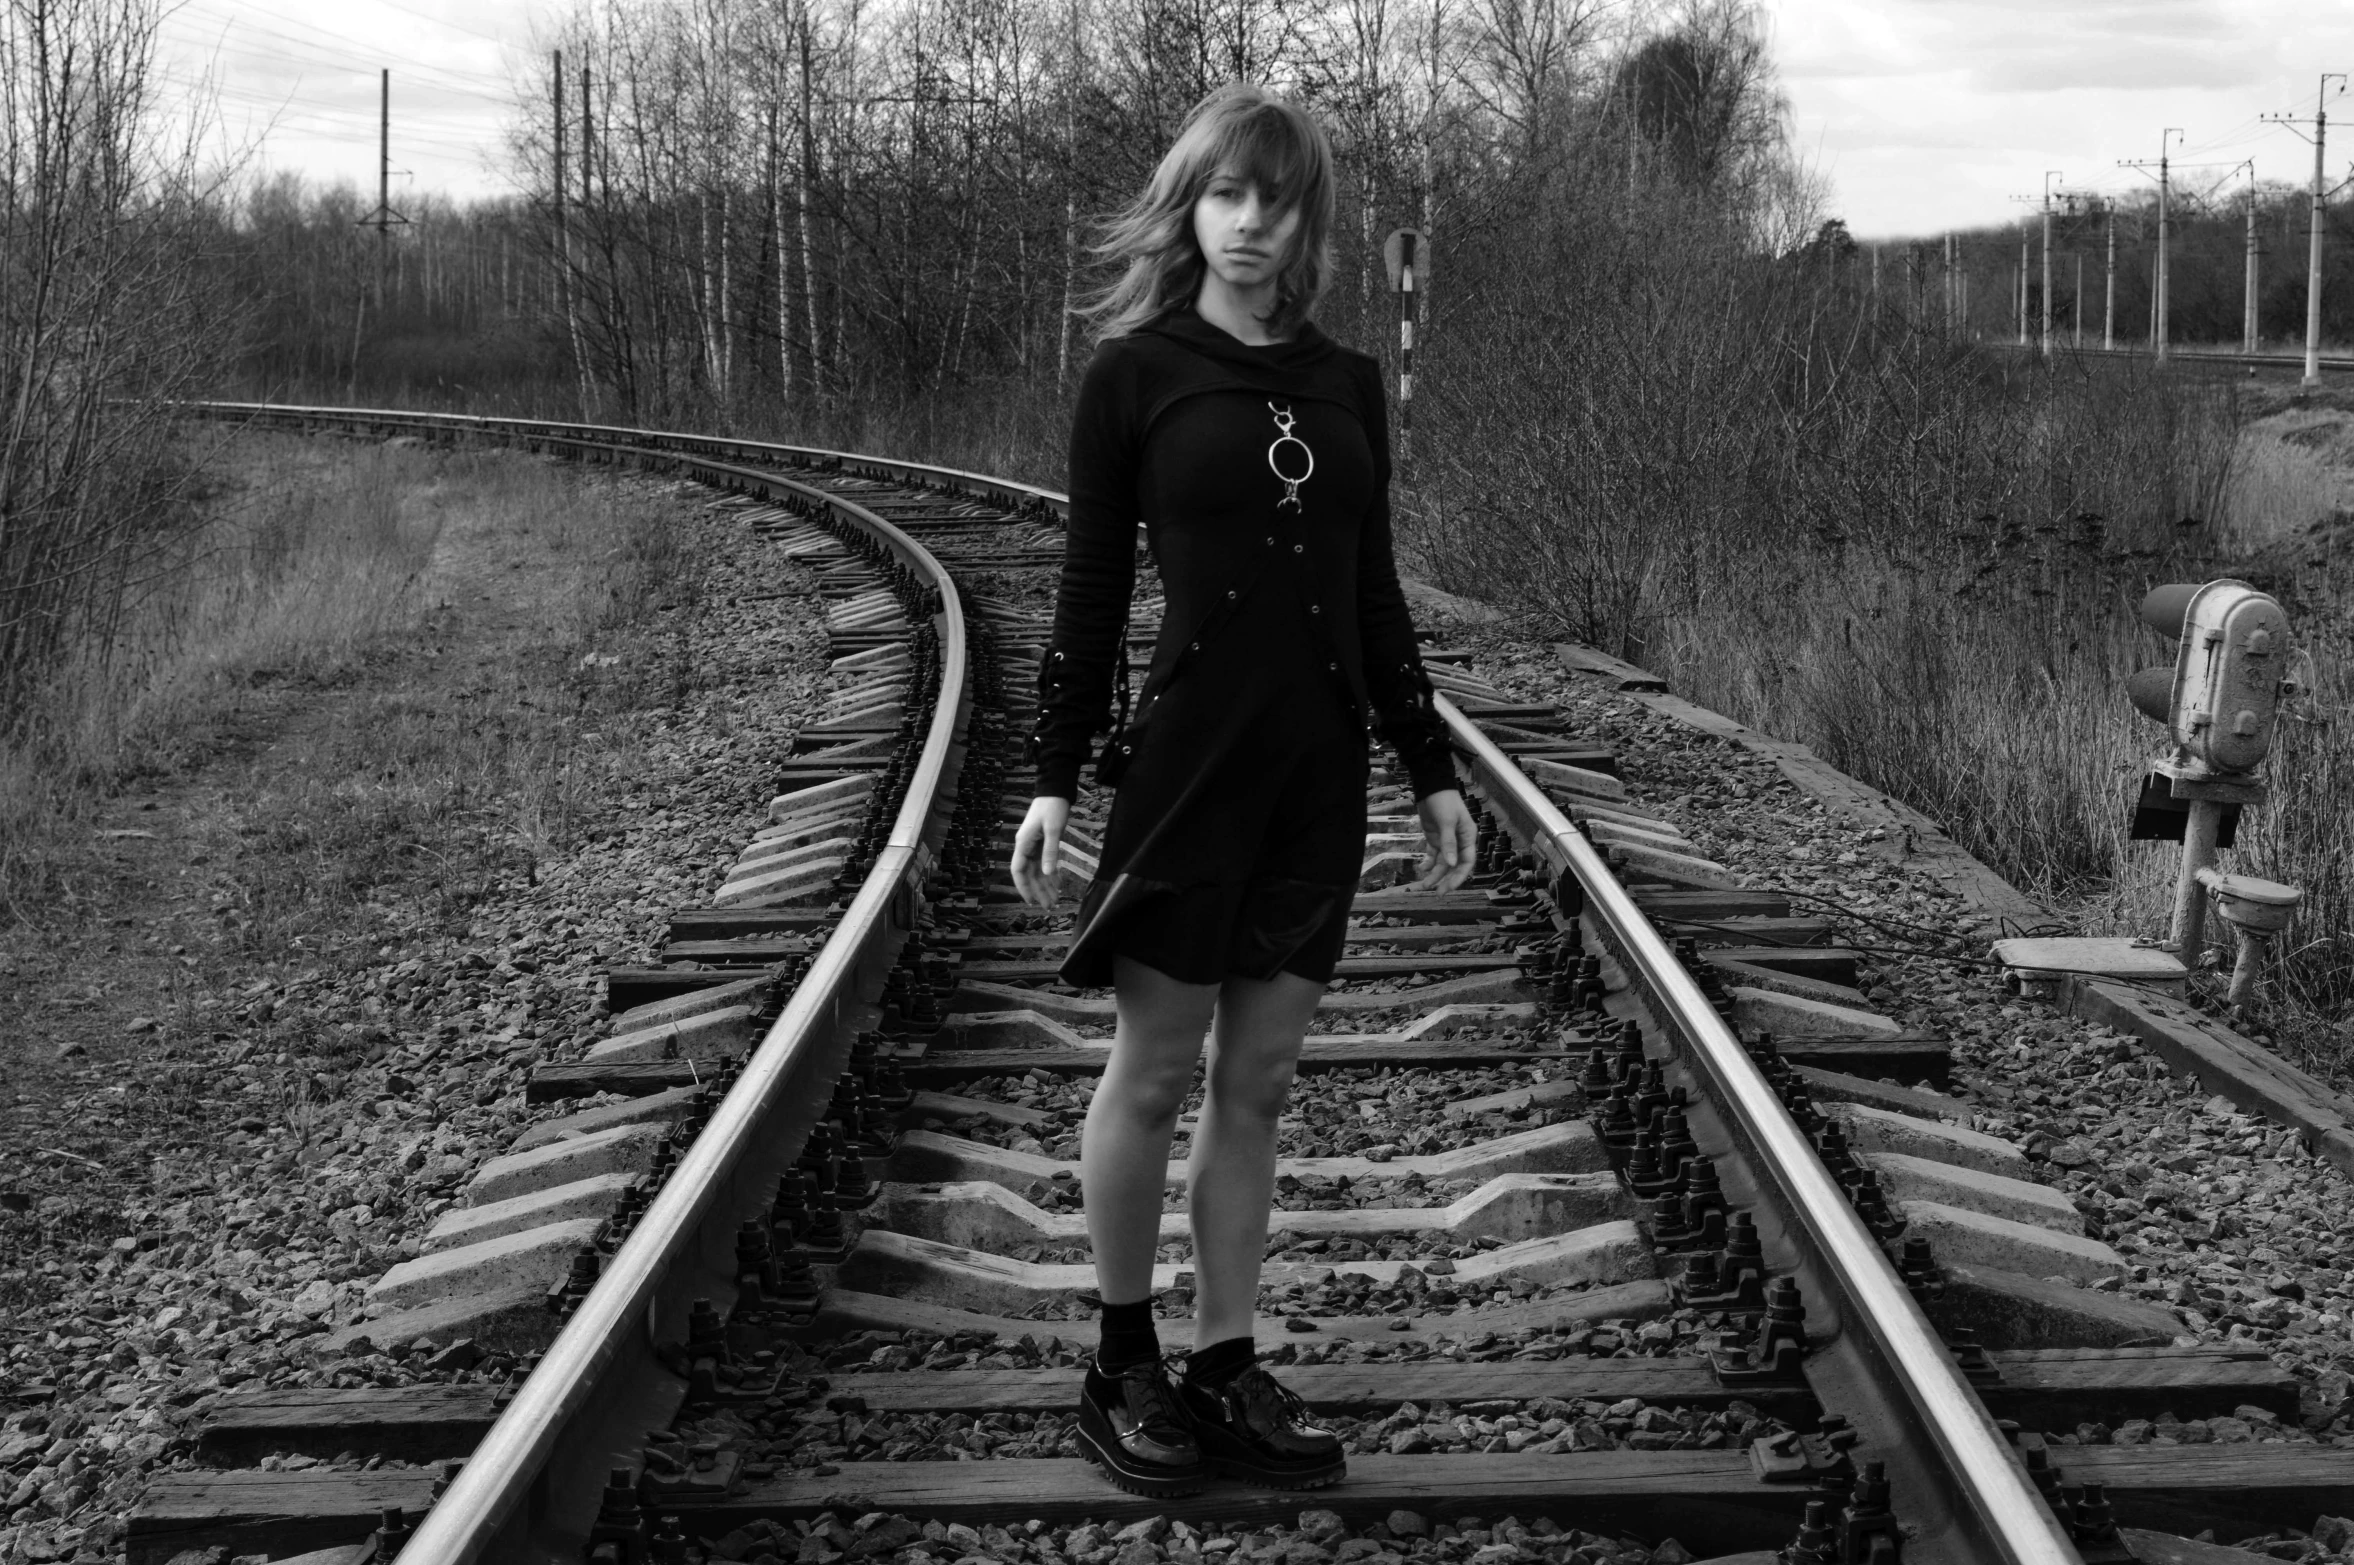 a woman in a black dress standing on a train track, an album cover, inspired by August Sander, surrealism, orthodox symbolism diesel punk, she wears boots, teenage girl, monochrome:-2